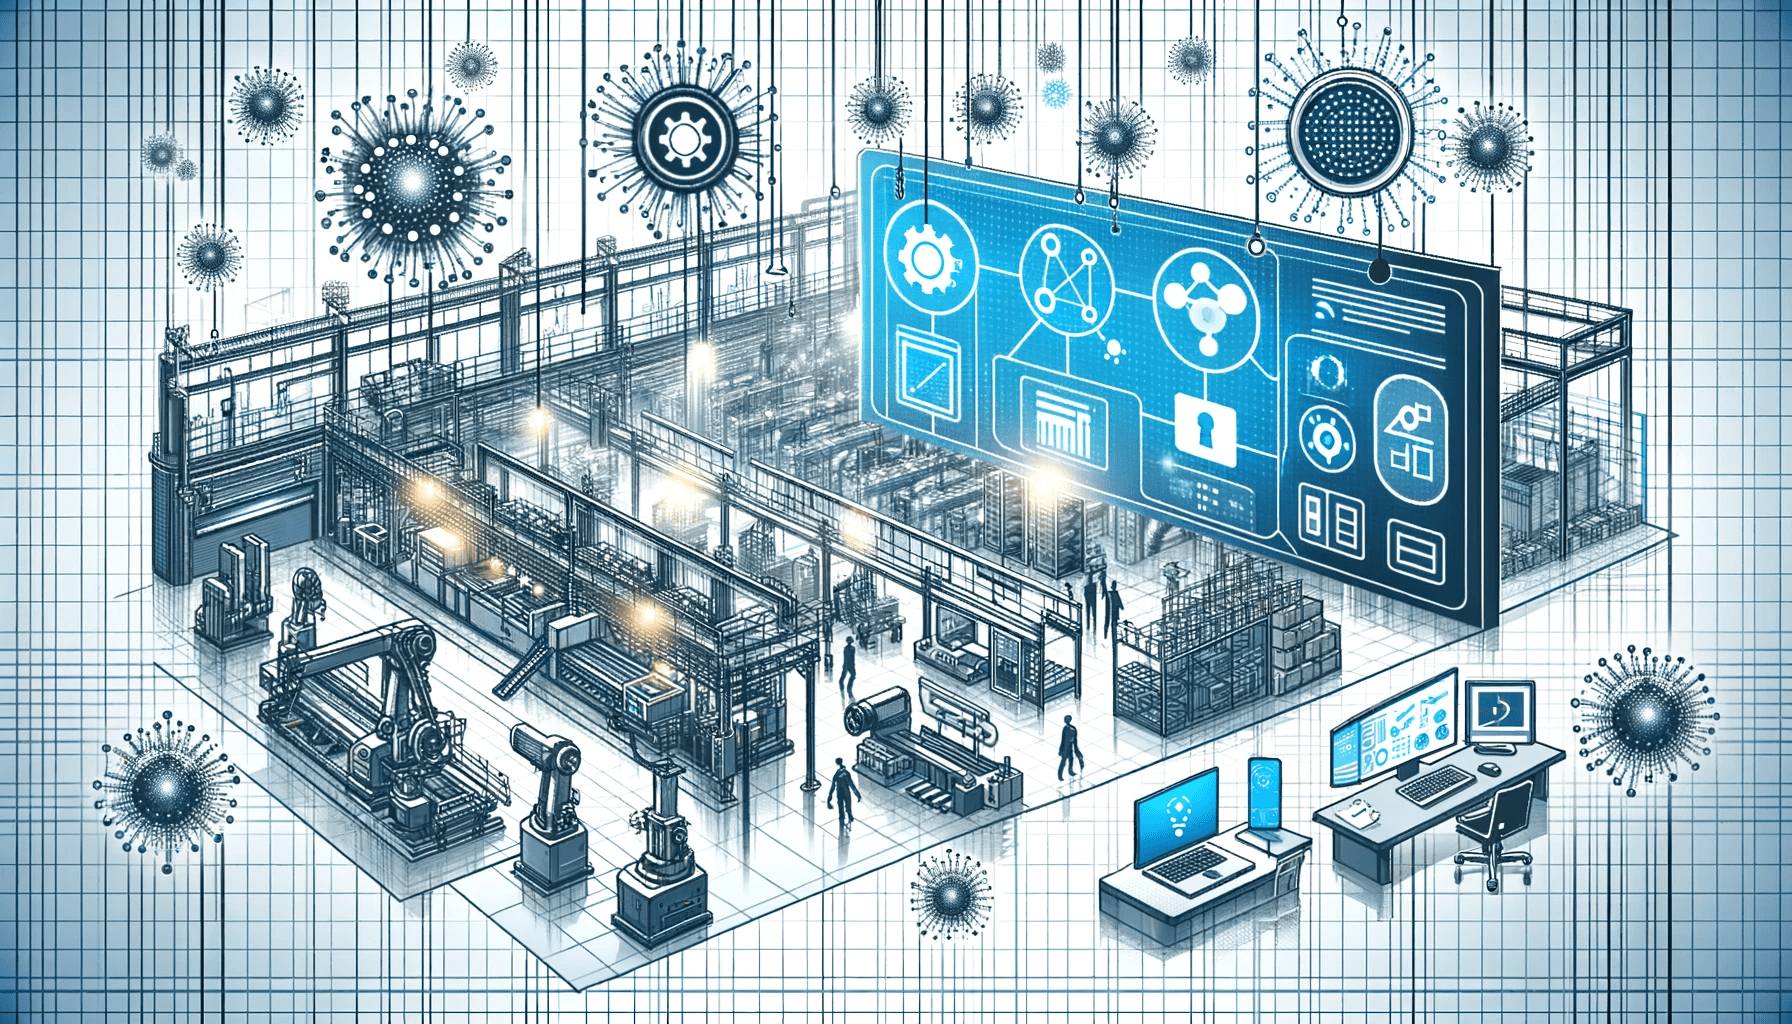  It visually represents a modern manufacturing setting with an emphasis on networked devices and digital interfaces, symbolizing advanced network configuration management.